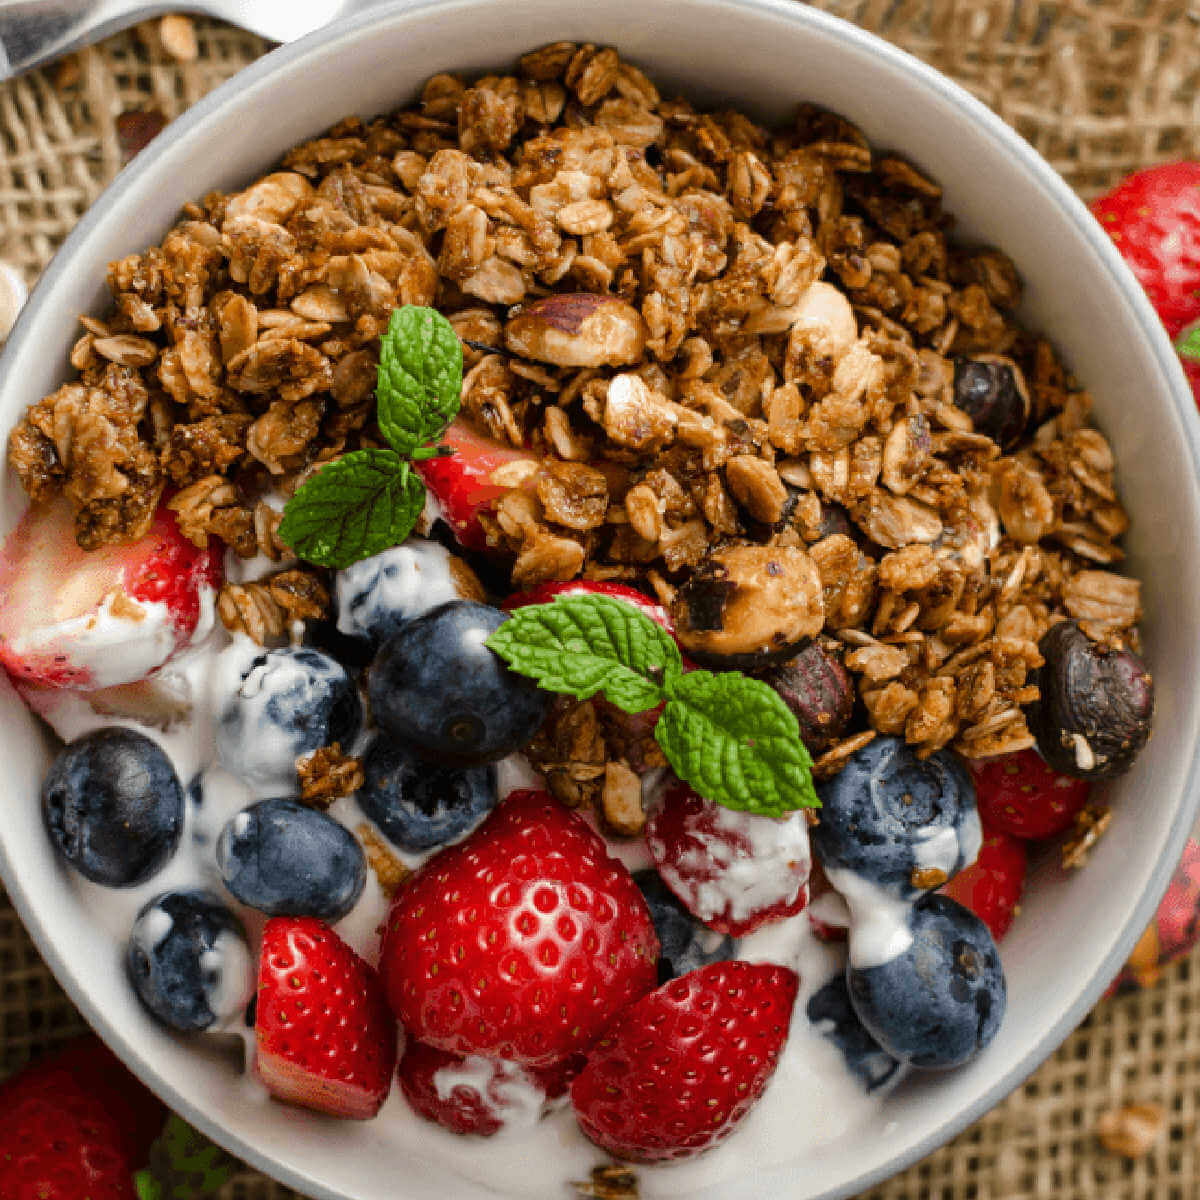 A bowl of homemade granola with strawberries and blueberries in the bowl.